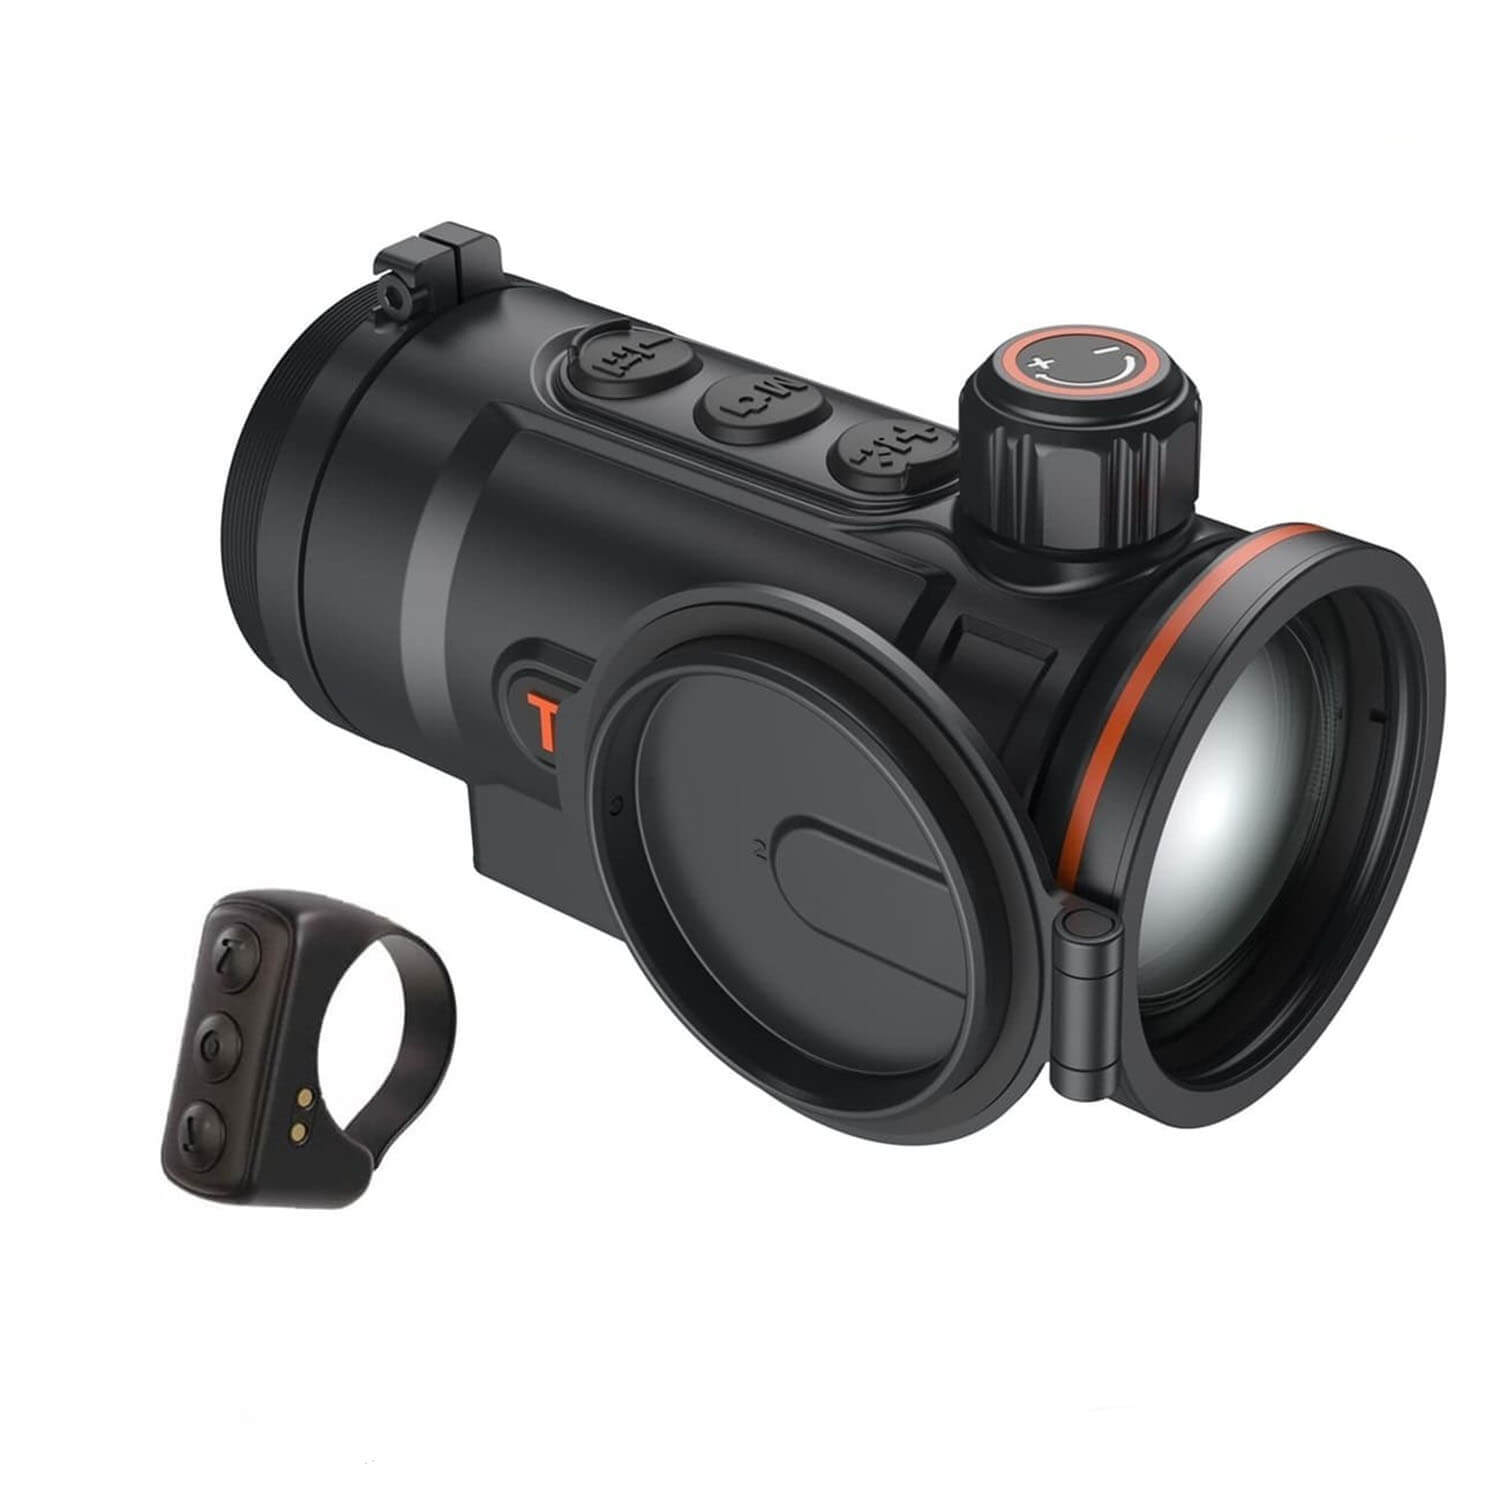 TermTec thermal imagine device Hunt 650 - Night Vision Devices